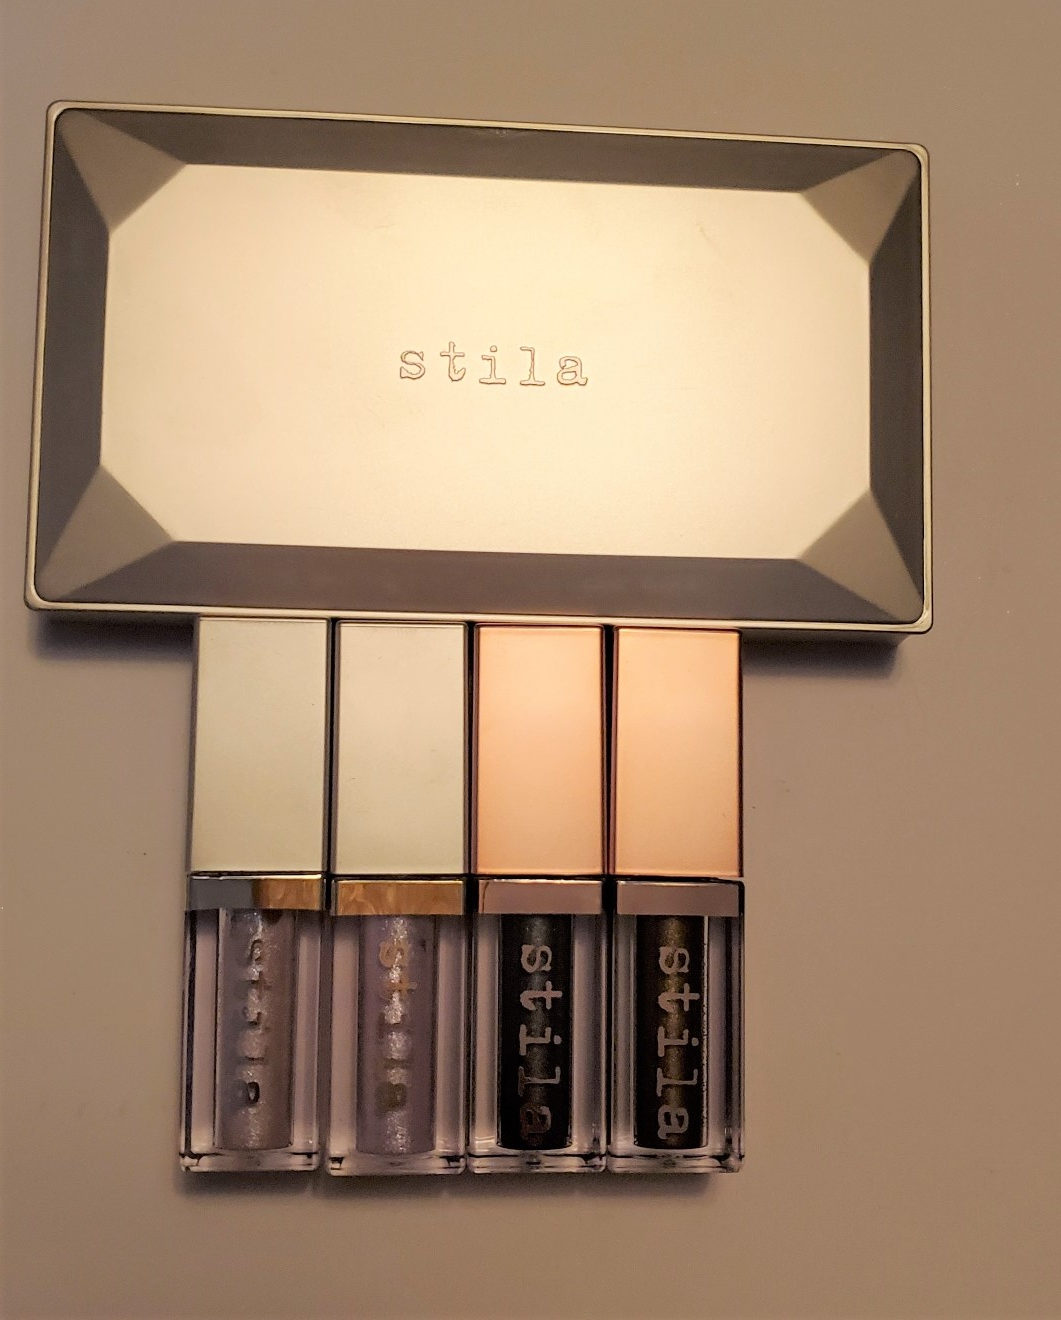 Review, Swatches, Photos, Makeup, Trends 2019, 2020: Stila, The Fourth Dimension Liquid Eyeshadow Set, The Blue Realm Velvet Eyeshadow Palette, Best Glittery Eye Products